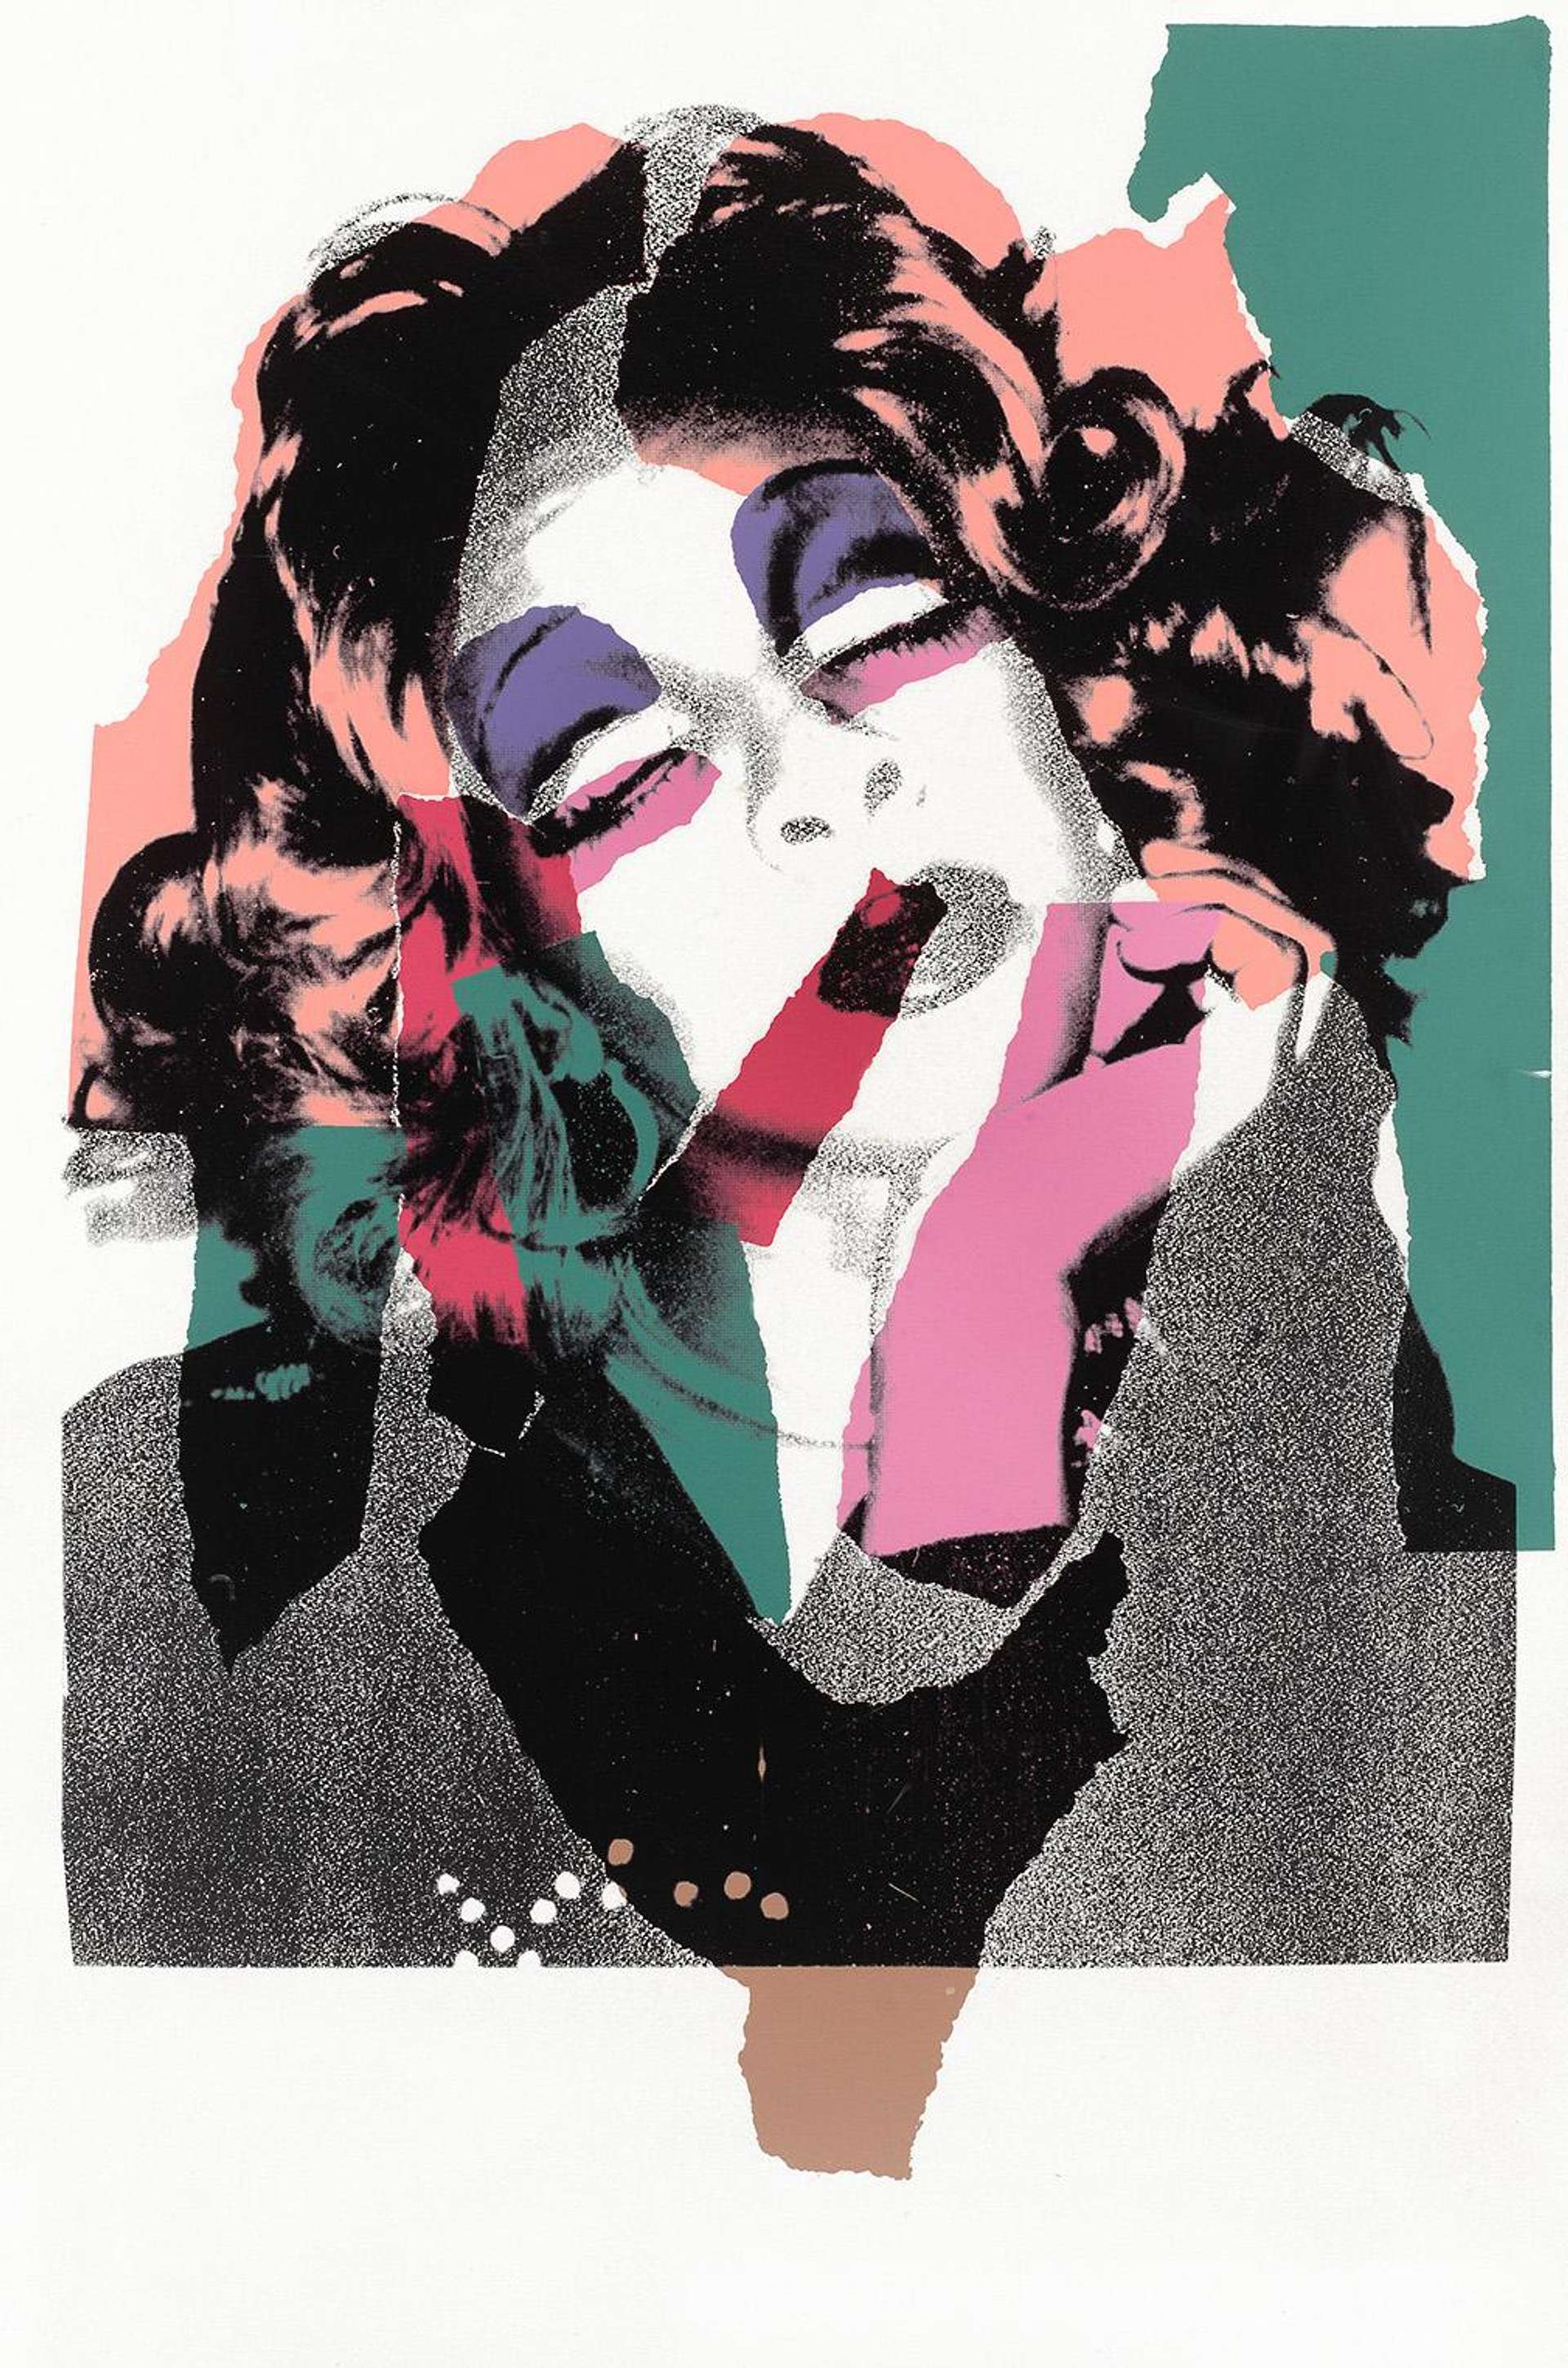 Andy Warhol's 'Ladies and Gentlemen' screenprint of a woman with a tilted head, resting her chin on the palm of one hand in a portrait pose. The woman has voluminous hair, and her makeup is accentuated with abstract coloring.